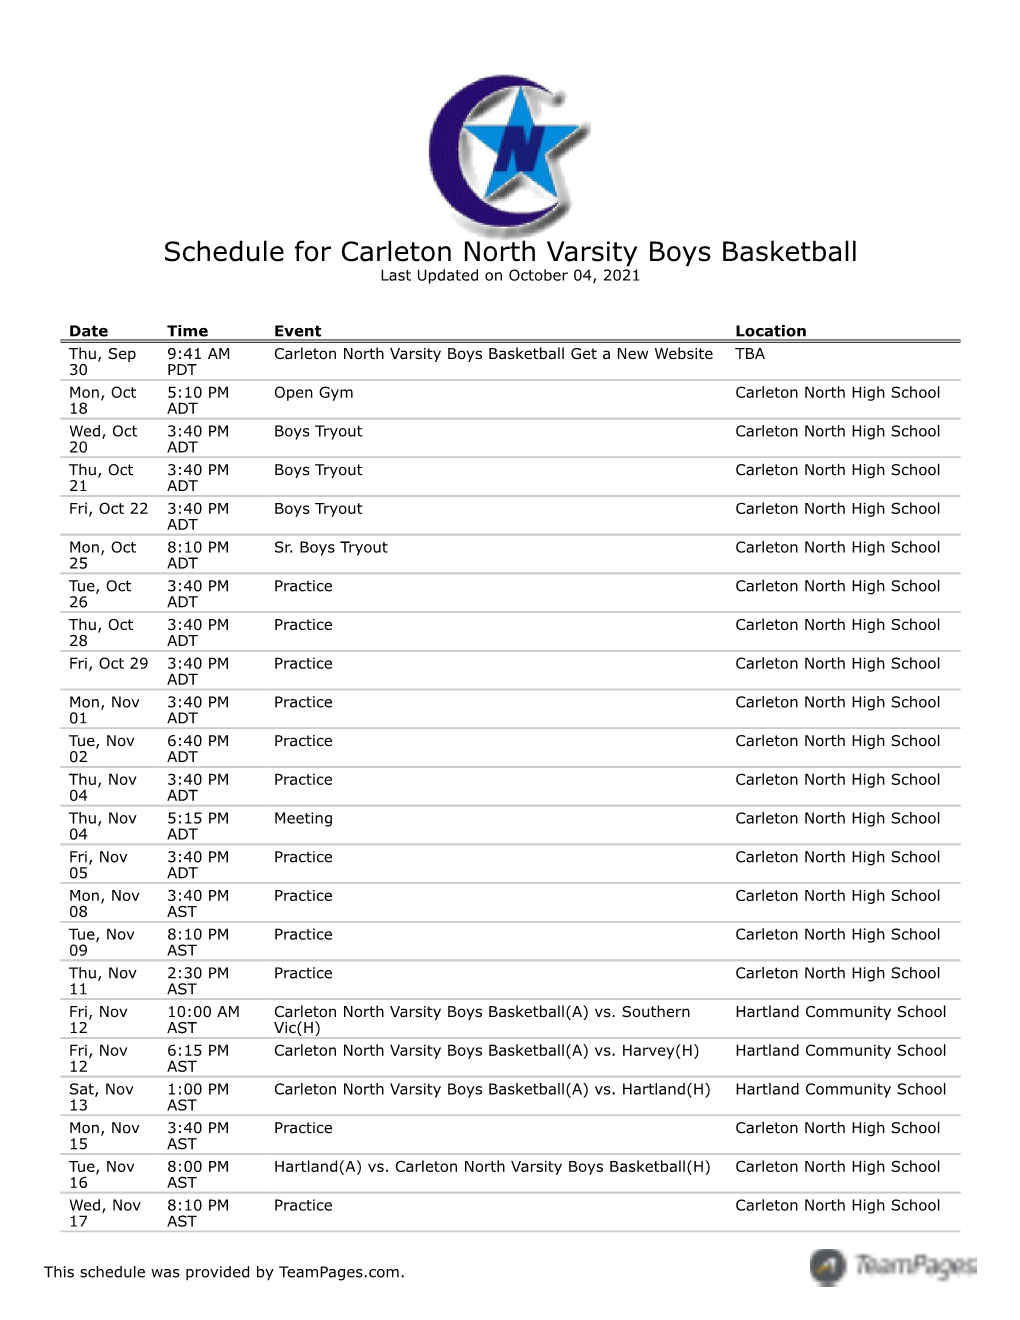 Schedule for Carleton North Varsity Boys Basketball Last Updated on October 04, 2021